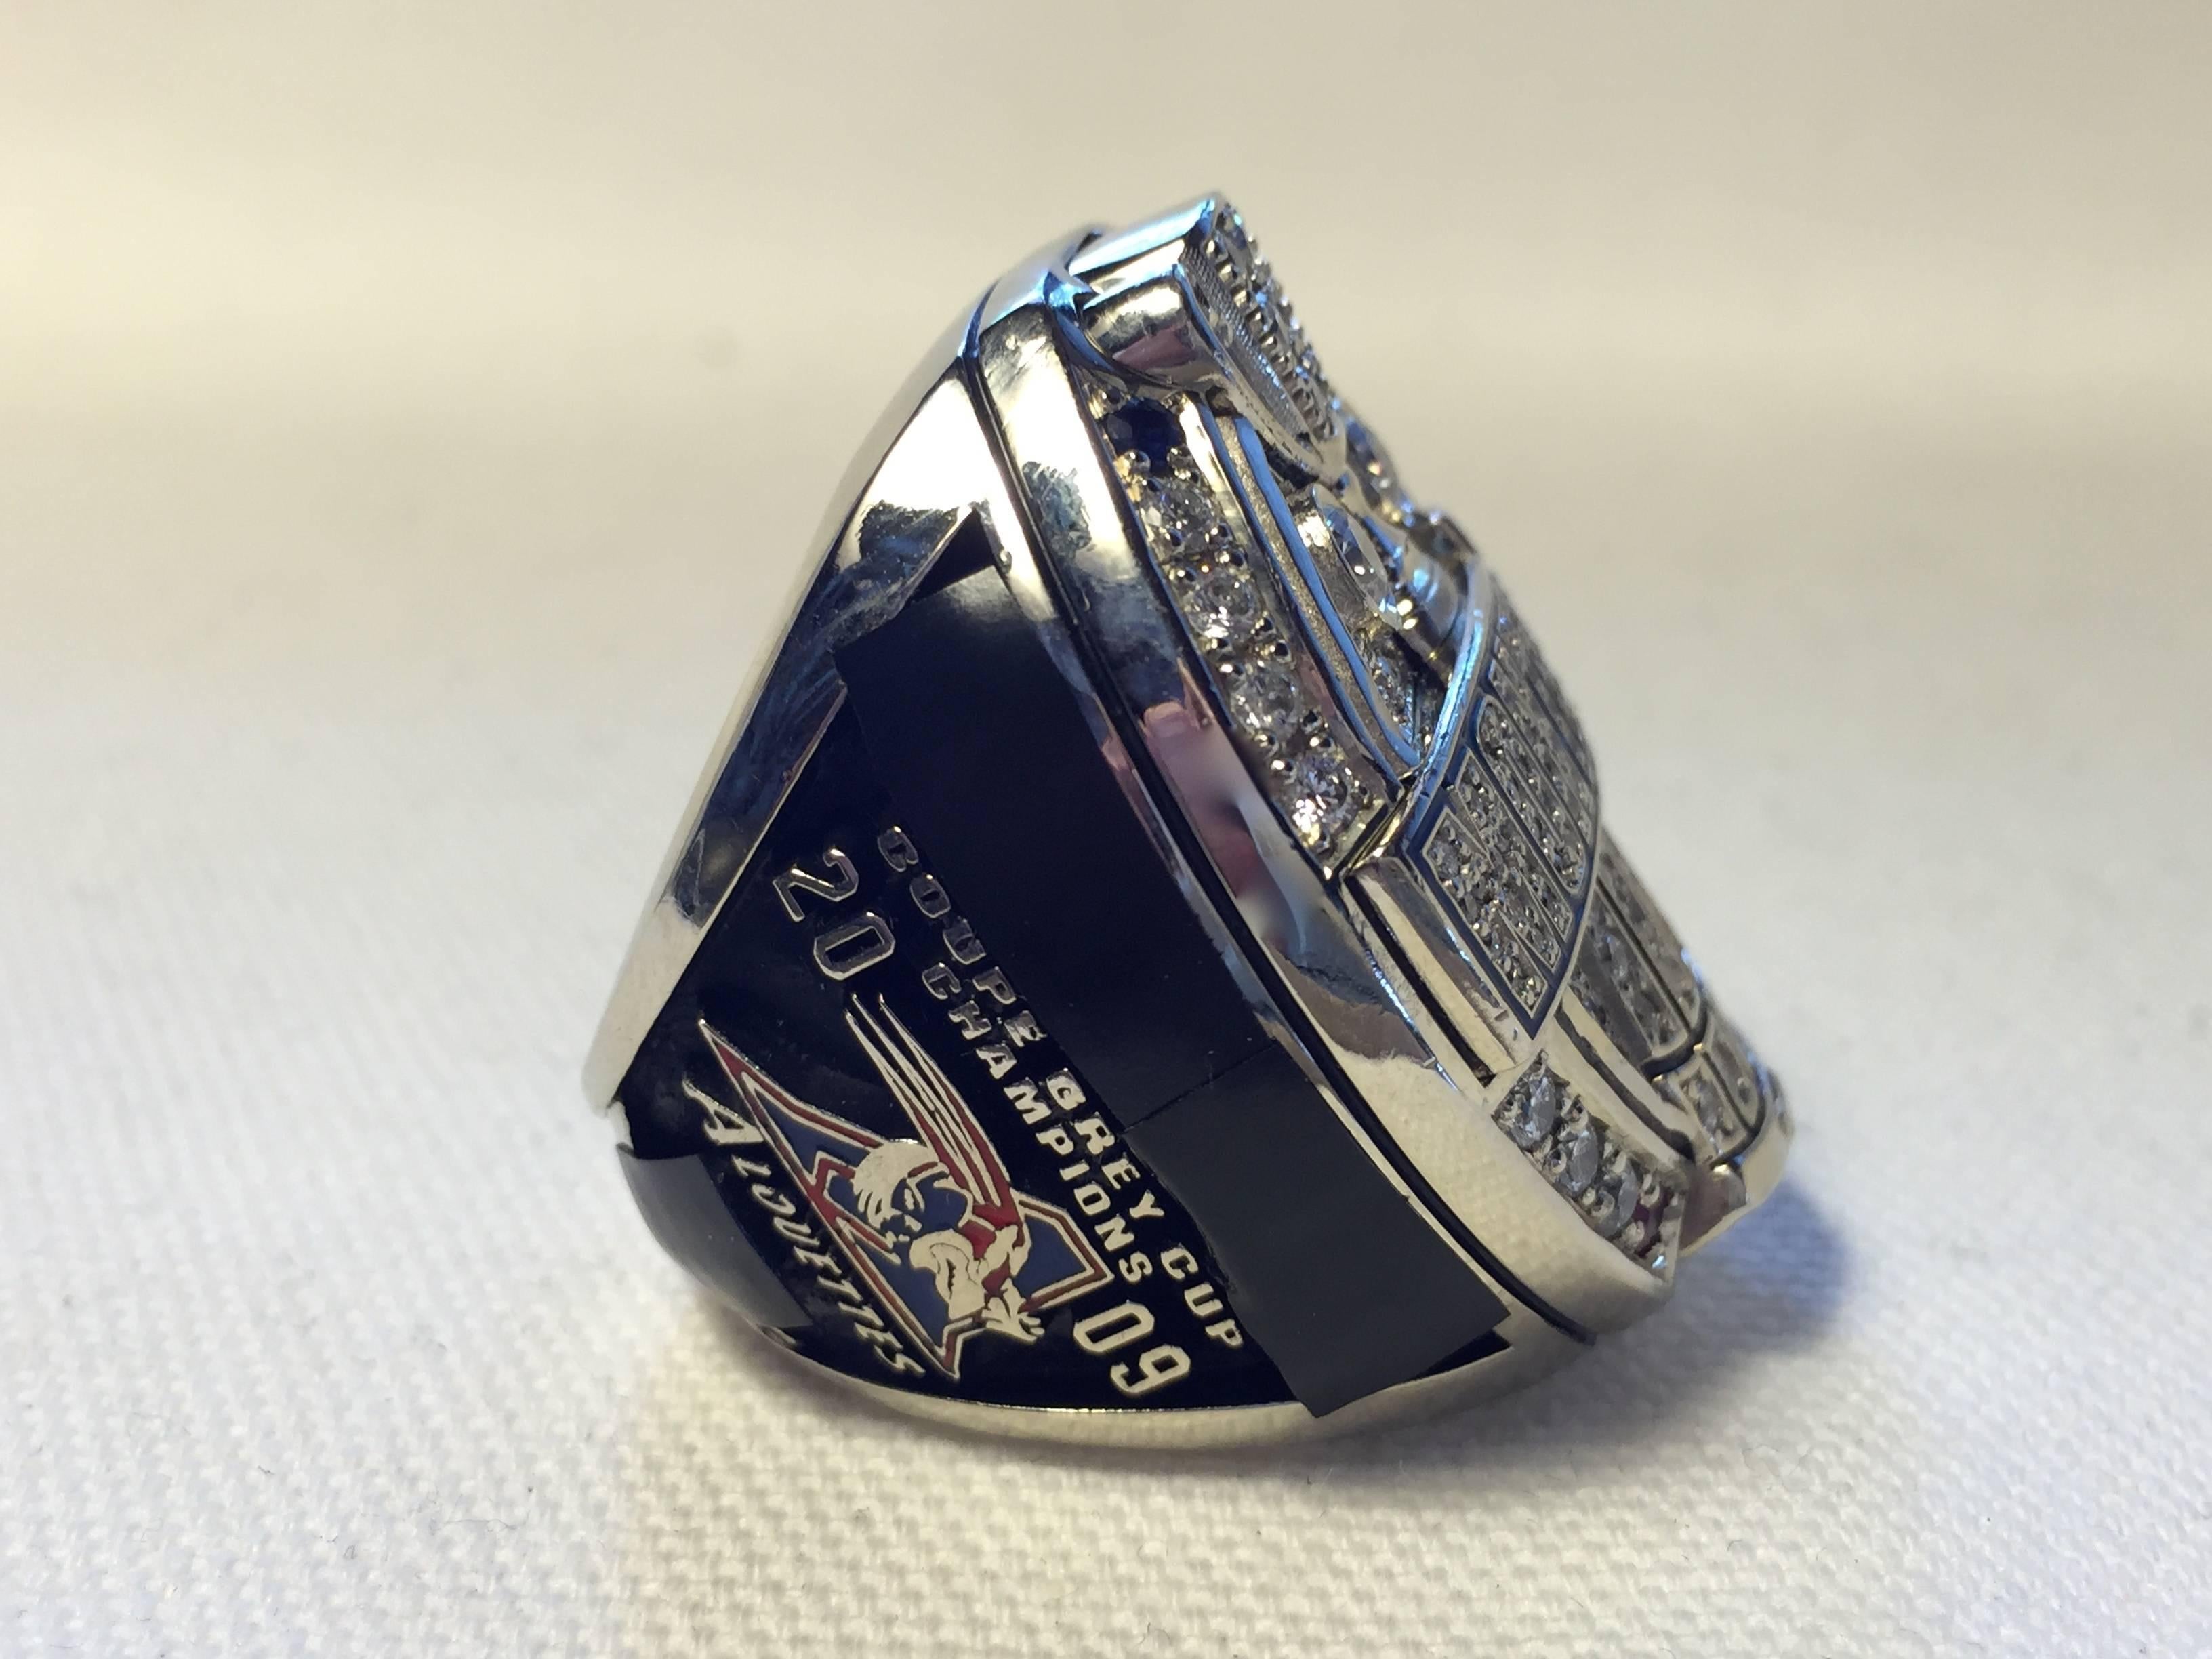 2009 Montreal Alouettes CFL Grey Cup Championship Players Ring football nfl gold For Sale 1